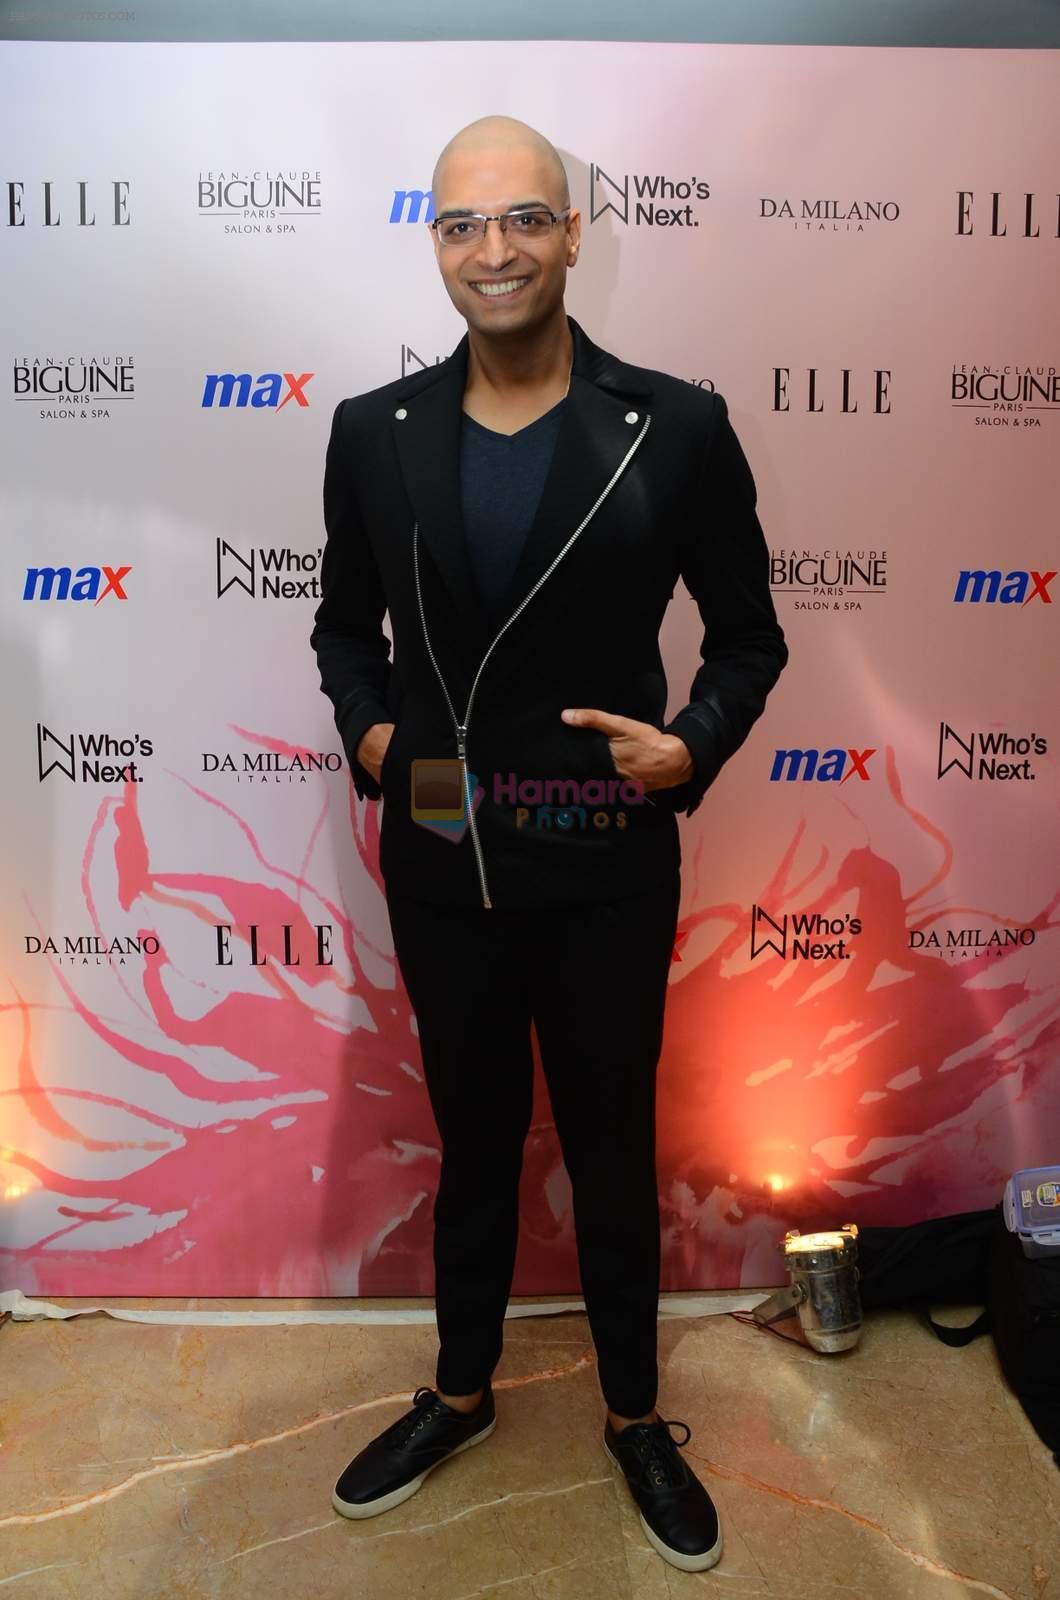 at Elle event on 19th Jan 2016